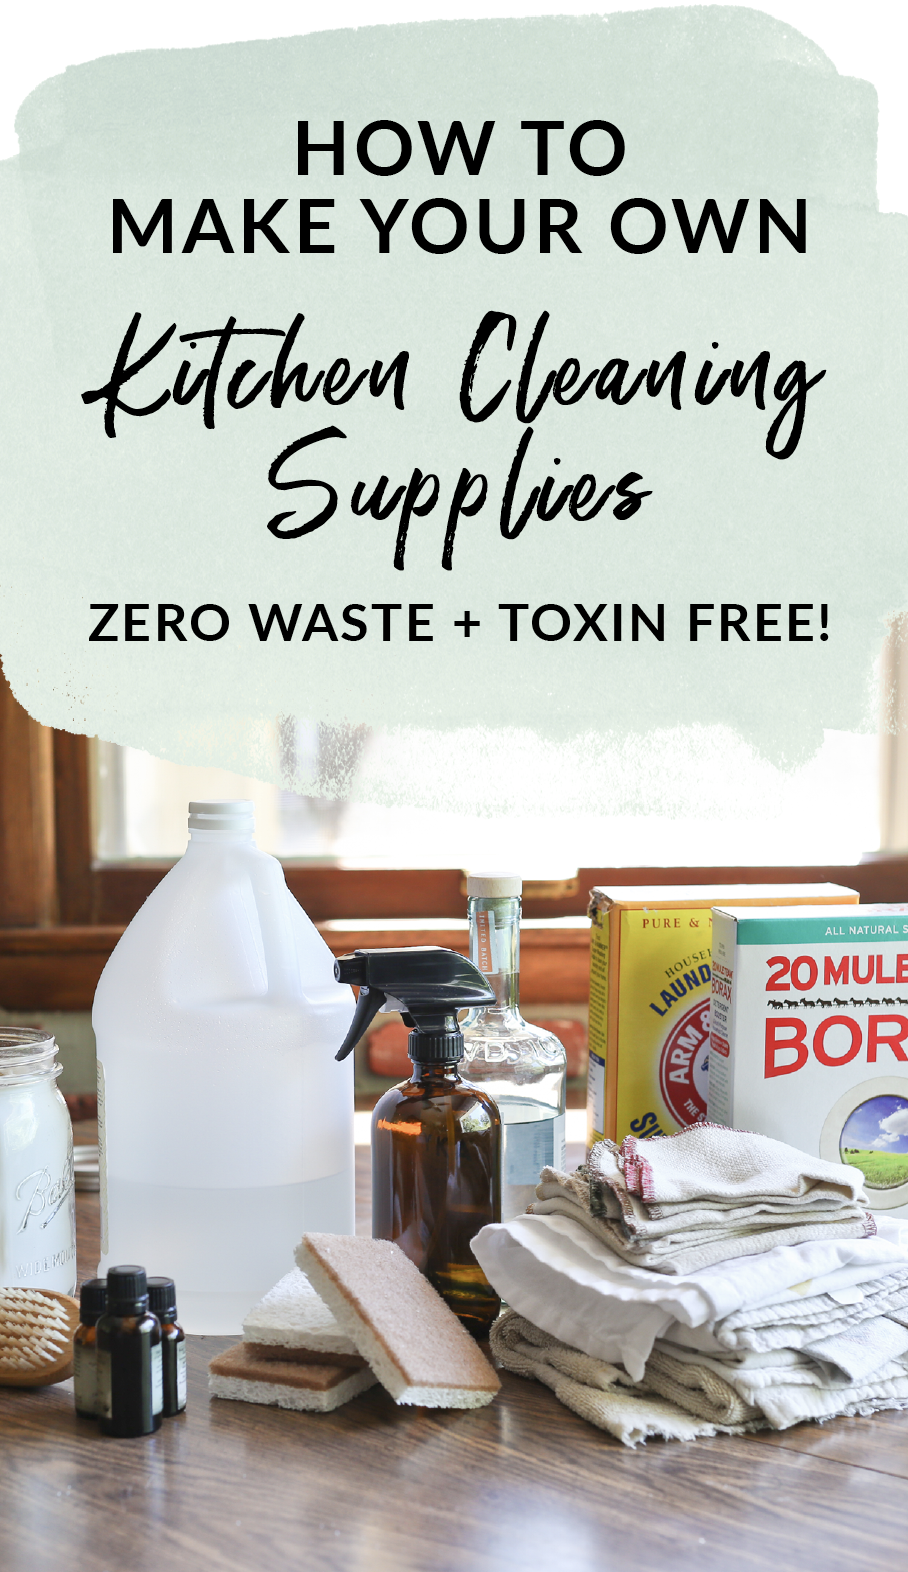 https://www.greenwillowhomestead.com/uploads/2/9/8/5/29854265/how-to-make-your-own-kitchen-cleaning-supplies-that-are-zero-waste-and-toxin-free_orig.png